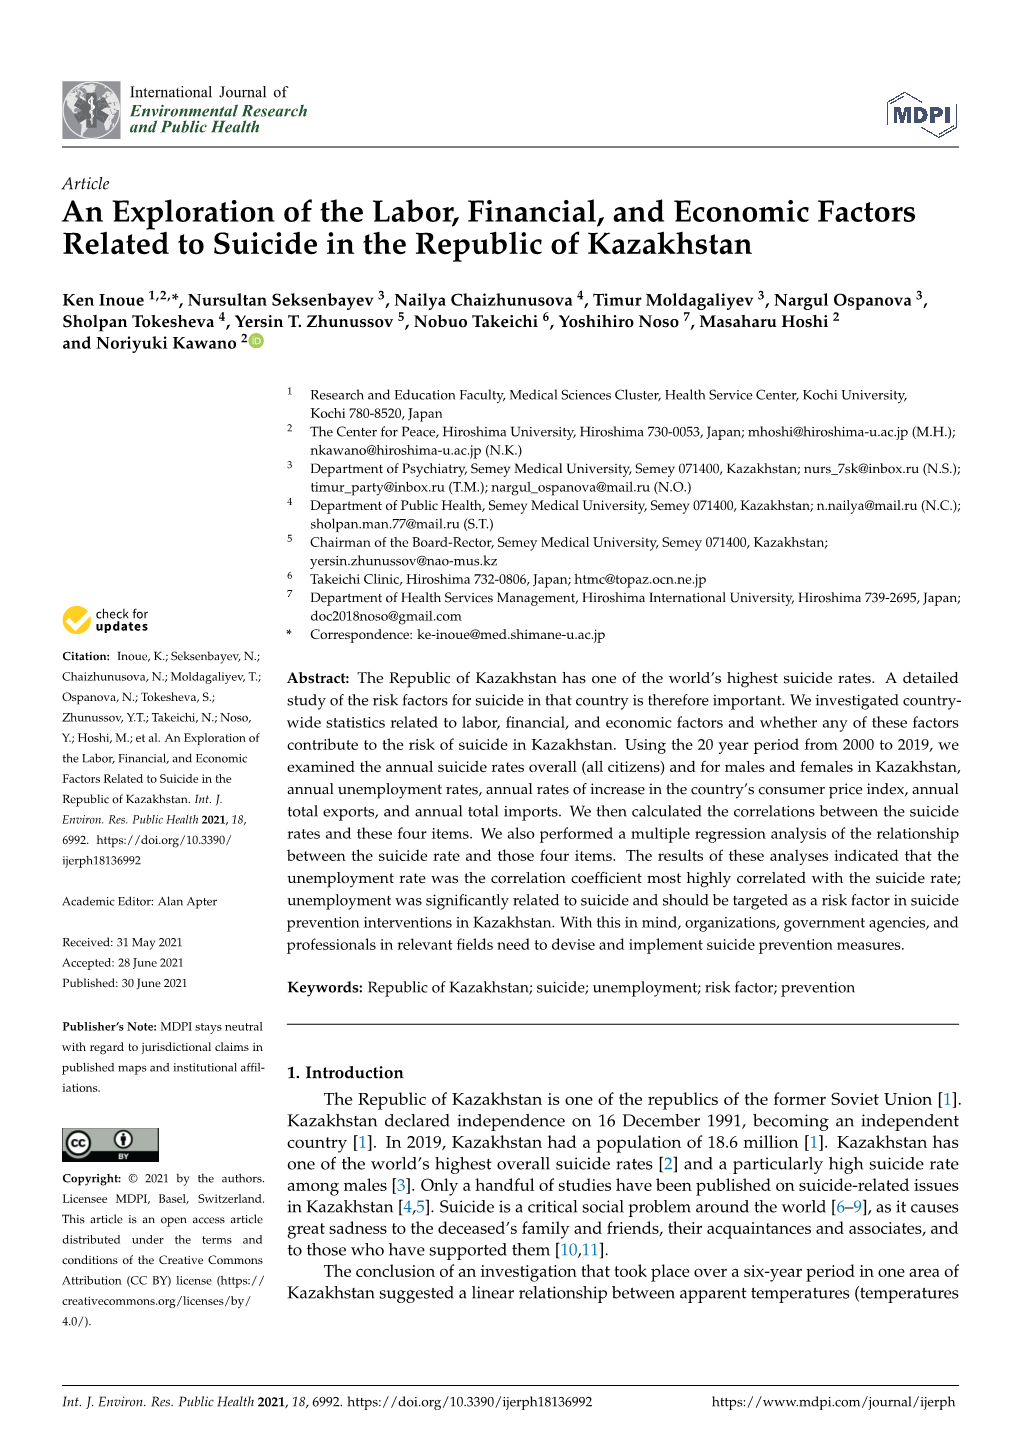 An Exploration of the Labor, Financial, and Economic Factors Related to Suicide in the Republic of Kazakhstan